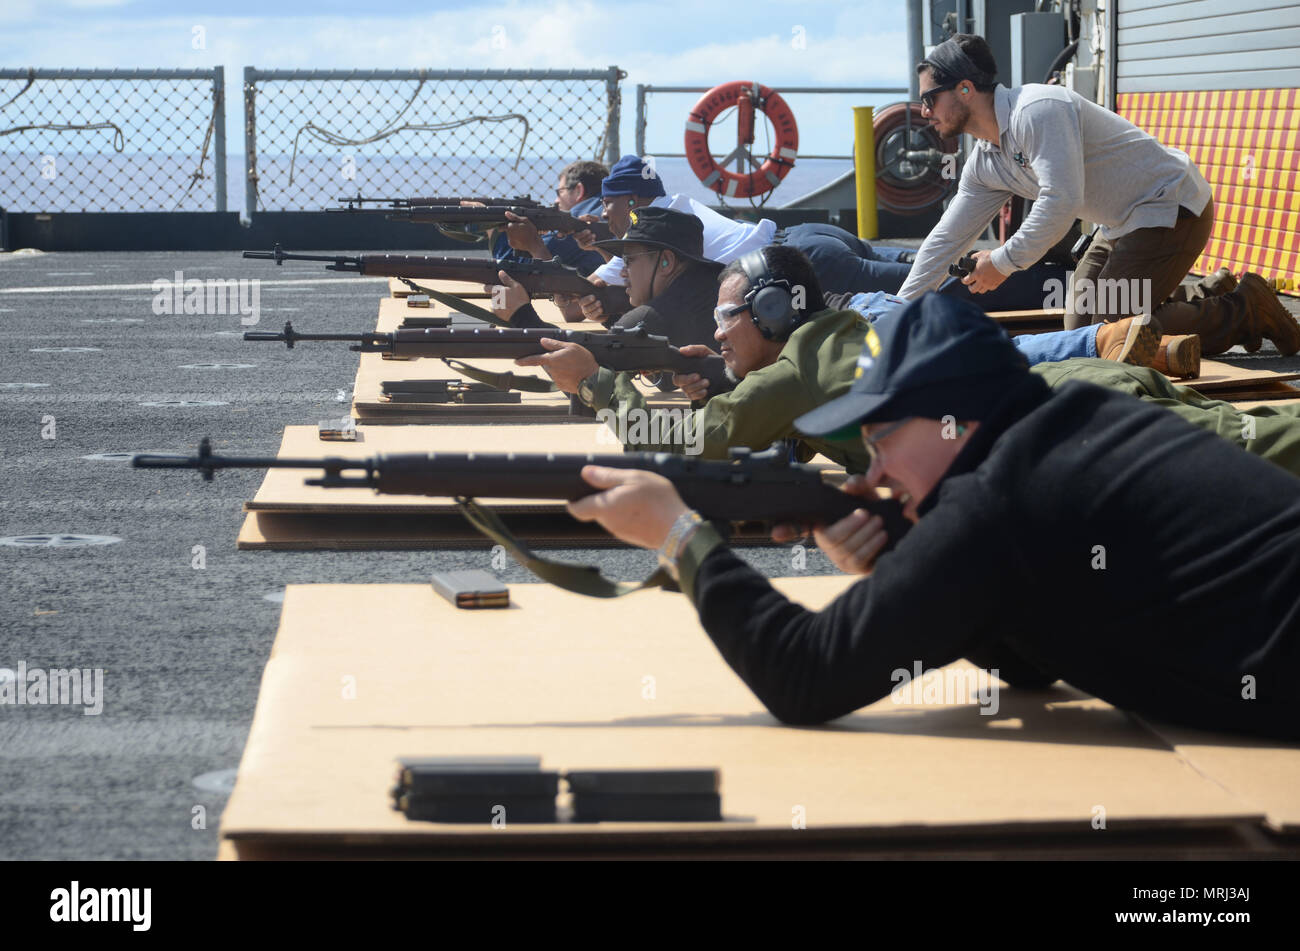 170621-N-WJ640-063 PACIFIC OCEAN (June 21, 2017) Civilian Mariners participate in live fire arms training onboard the flight deck of USNS Sacagawea (T-AKE 2) during Koa Moana 17, June 21. The Koa Moana 17 (Ocean Warrior) exercise is designed to improve interoperability; enhance military-to-military relations and expose Marine Corps forces to different types of terrain for familiarity in the event of a natural disaster or crisis in the region. (U.S. Navy photo by Mass Communication Specialist 3rd Class Madailein Abbott) Stock Photo